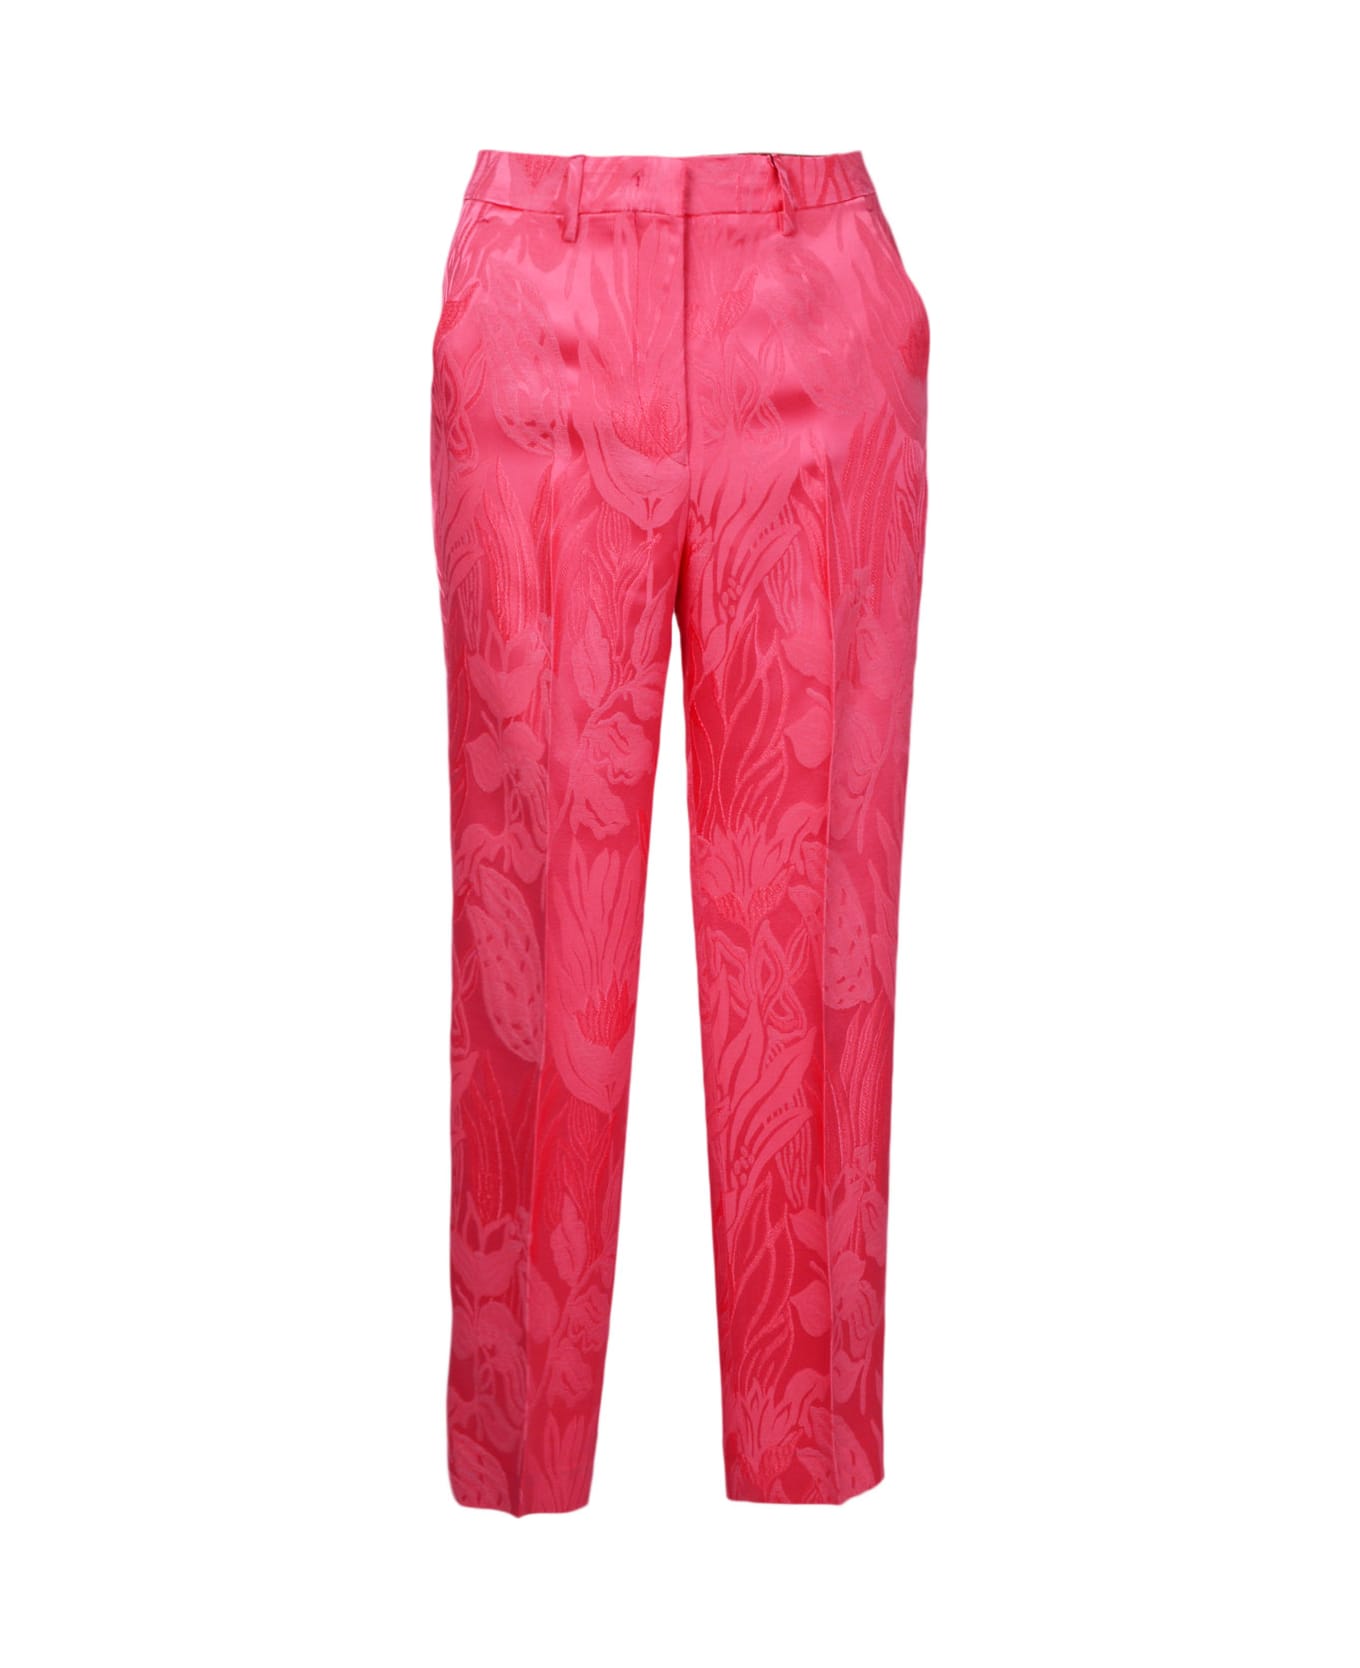 Etro Tailored Floral Jacquard Trousers - Red